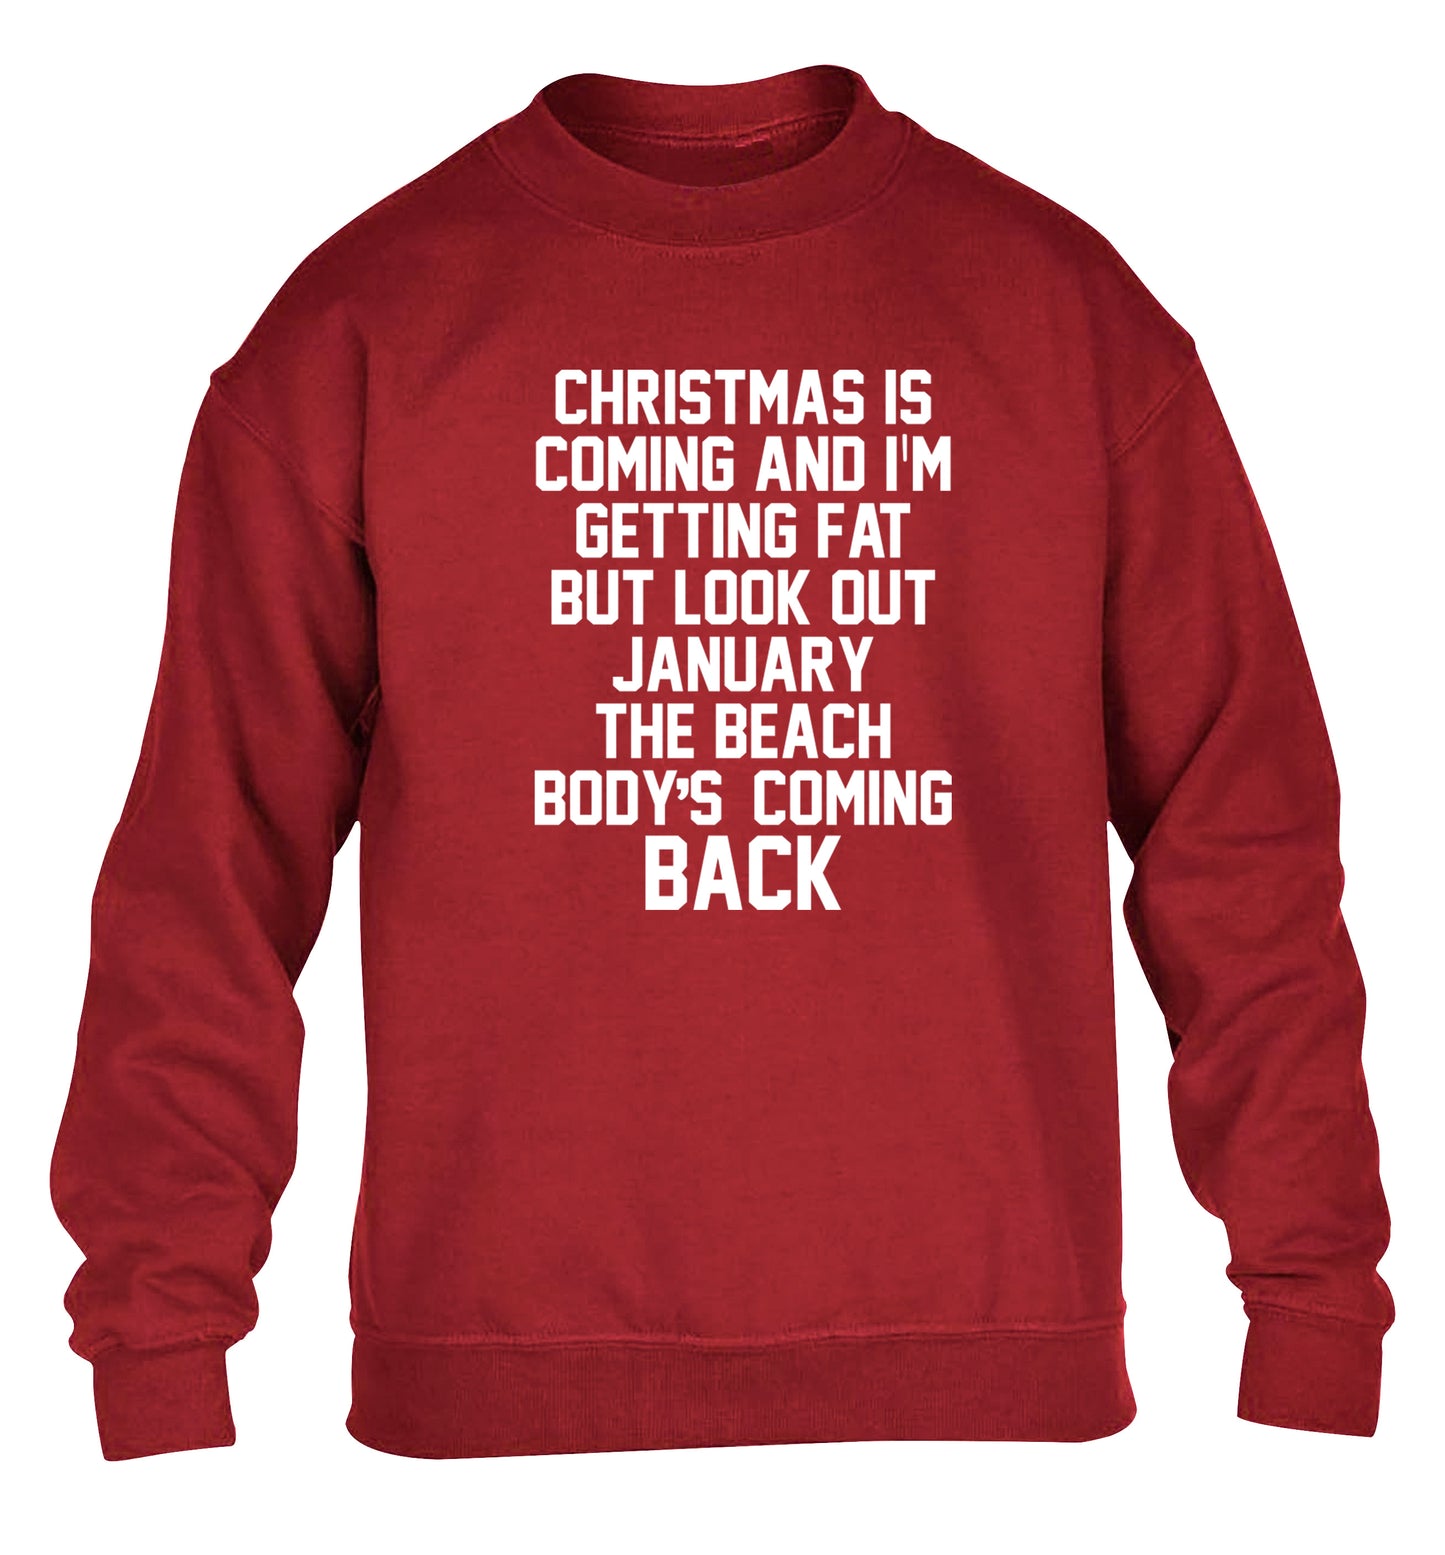 Christmas is coming and I'm getting fat but look out January the beach body's coming back! children's grey sweater 12-14 Years